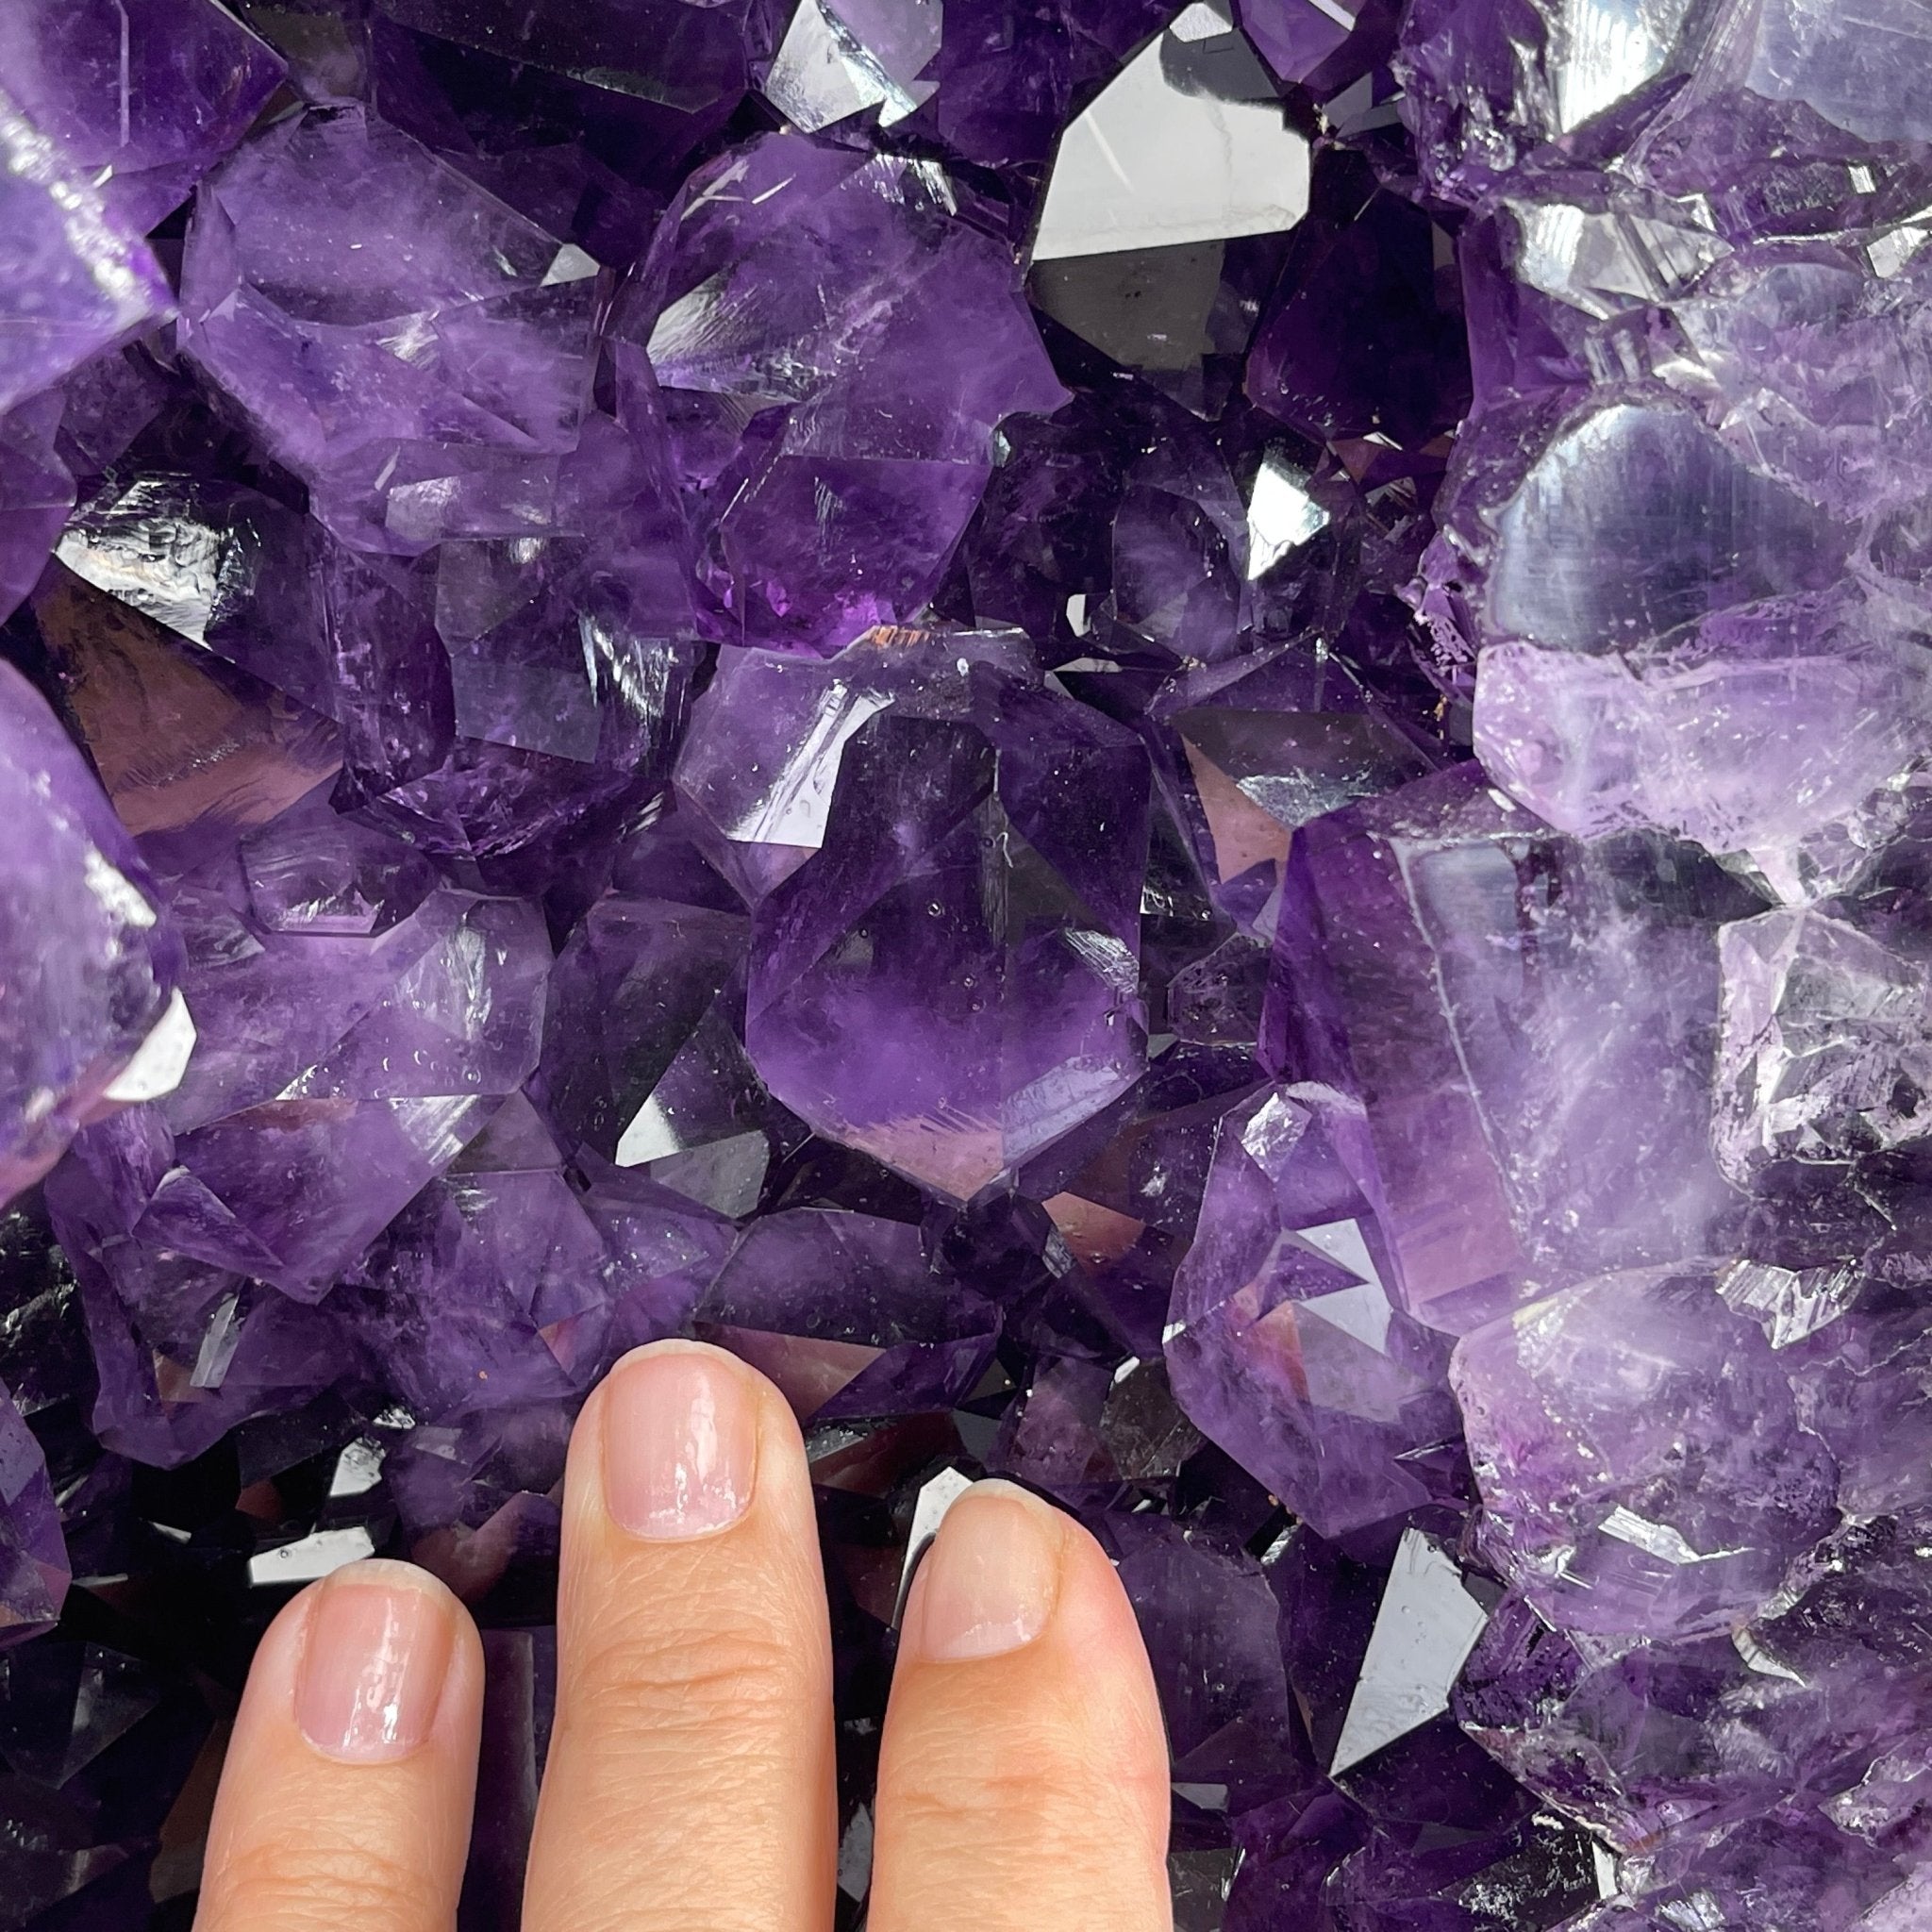 Super Quality Brazilian Amethyst Cathedral, 24.5” tall & 86 lbs #5601-0494 by Brazil Gems - Brazil GemsBrazil GemsSuper Quality Brazilian Amethyst Cathedral, 24.5” tall & 86 lbs #5601-0494 by Brazil GemsCathedrals5601-0494